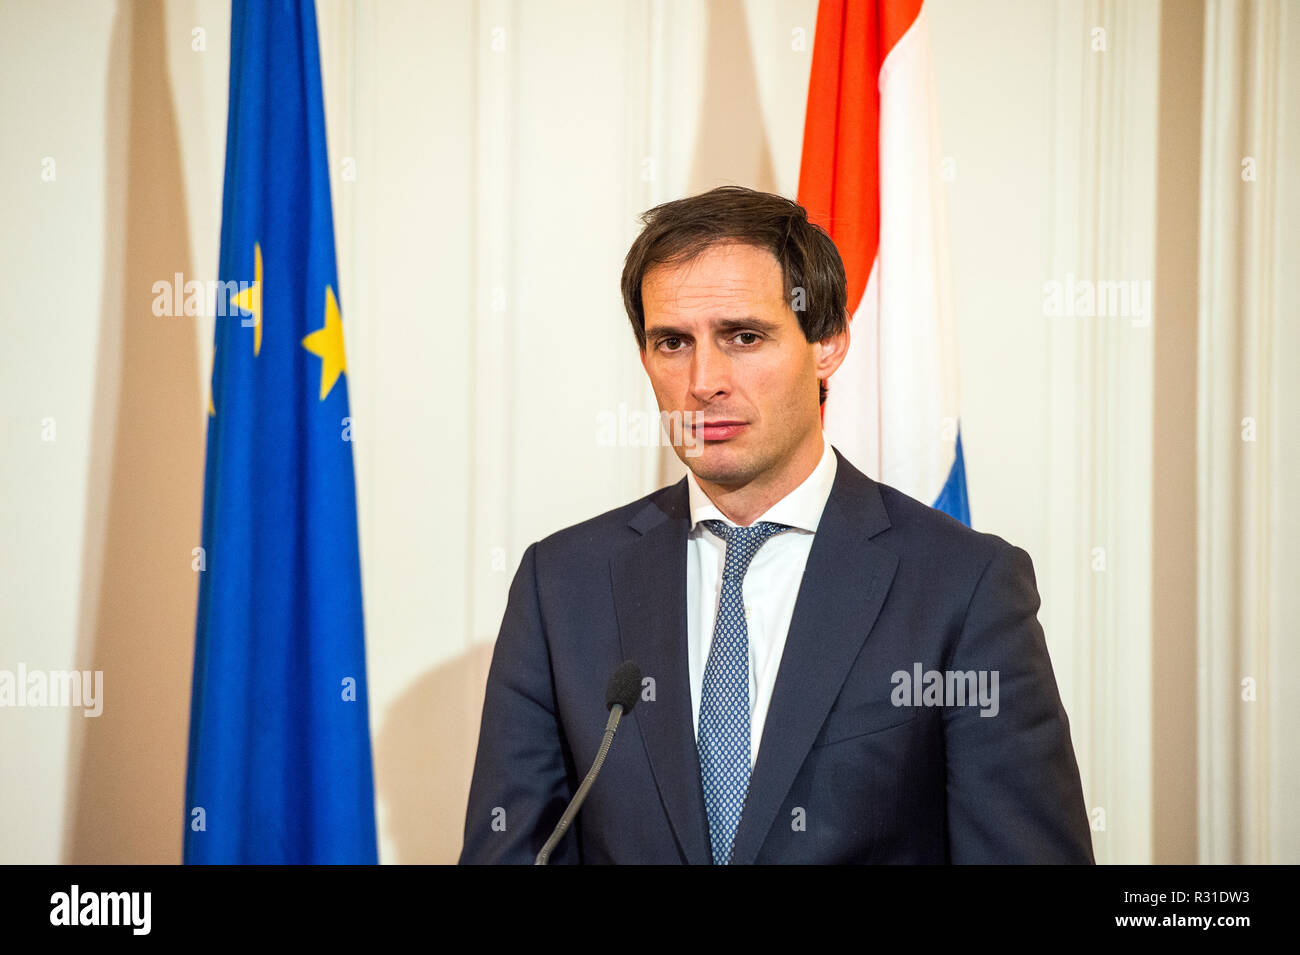 The Hague, Netherlands. 21st Nov 2018. EuroGroup President Mario Centeno visit The Hague to meet Finance Minister Wopke Hoekstra. Discussion topic is to strengthen the euro zone, for example through a larger role for the ESM bailout fund. Credit: Gonçalo Silva/Alamy Live News Stock Photo